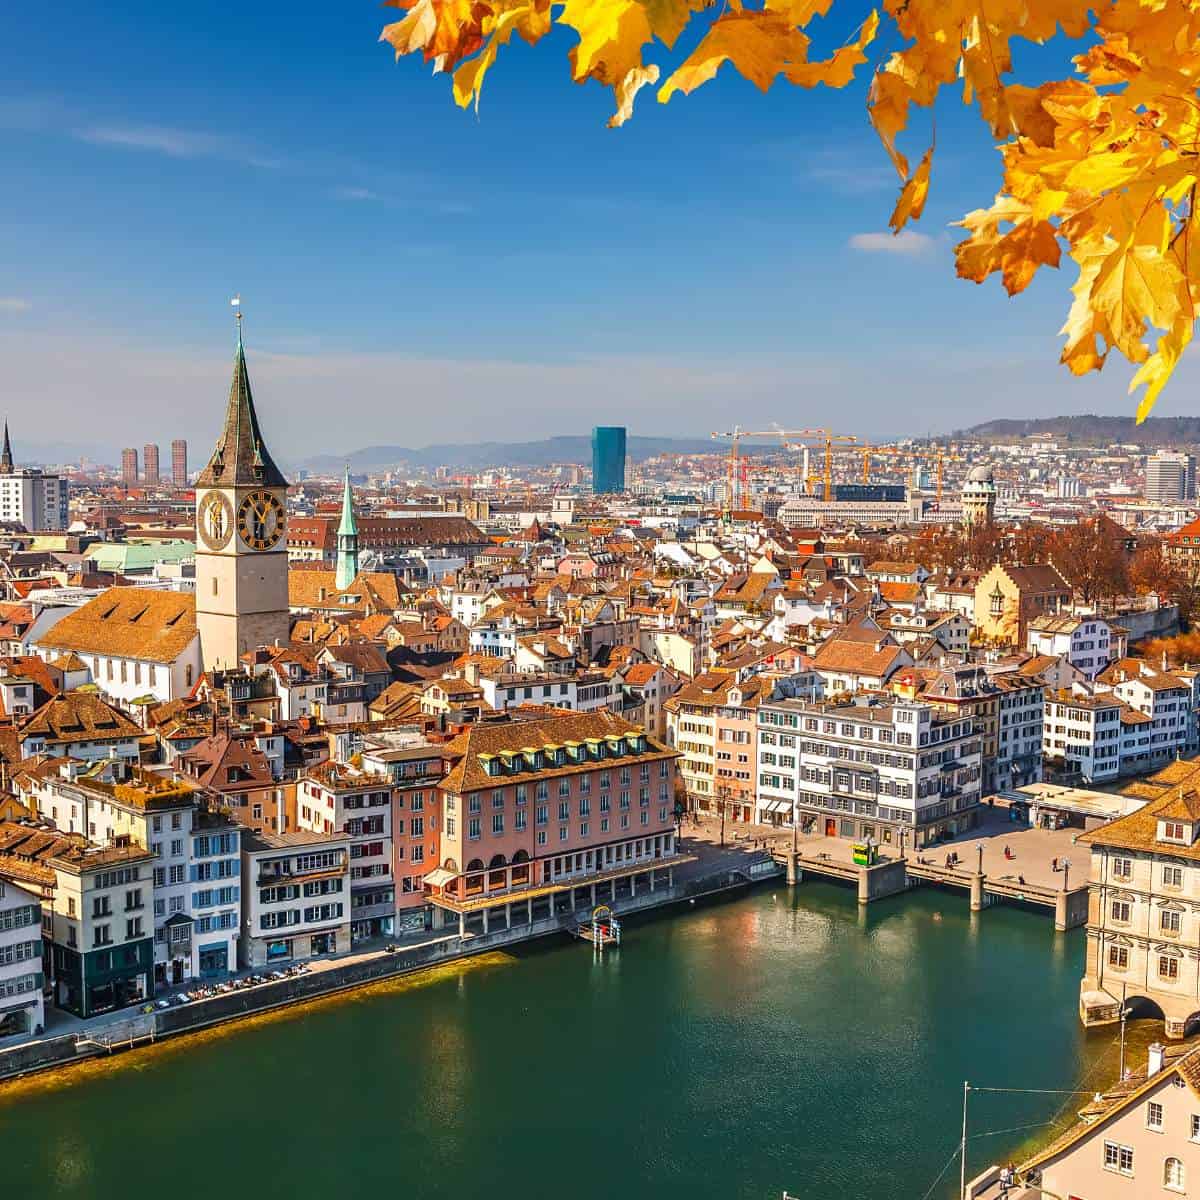 A city in Switzerland known for its picturesque landscapes featuring lush trees and a tranquil river.